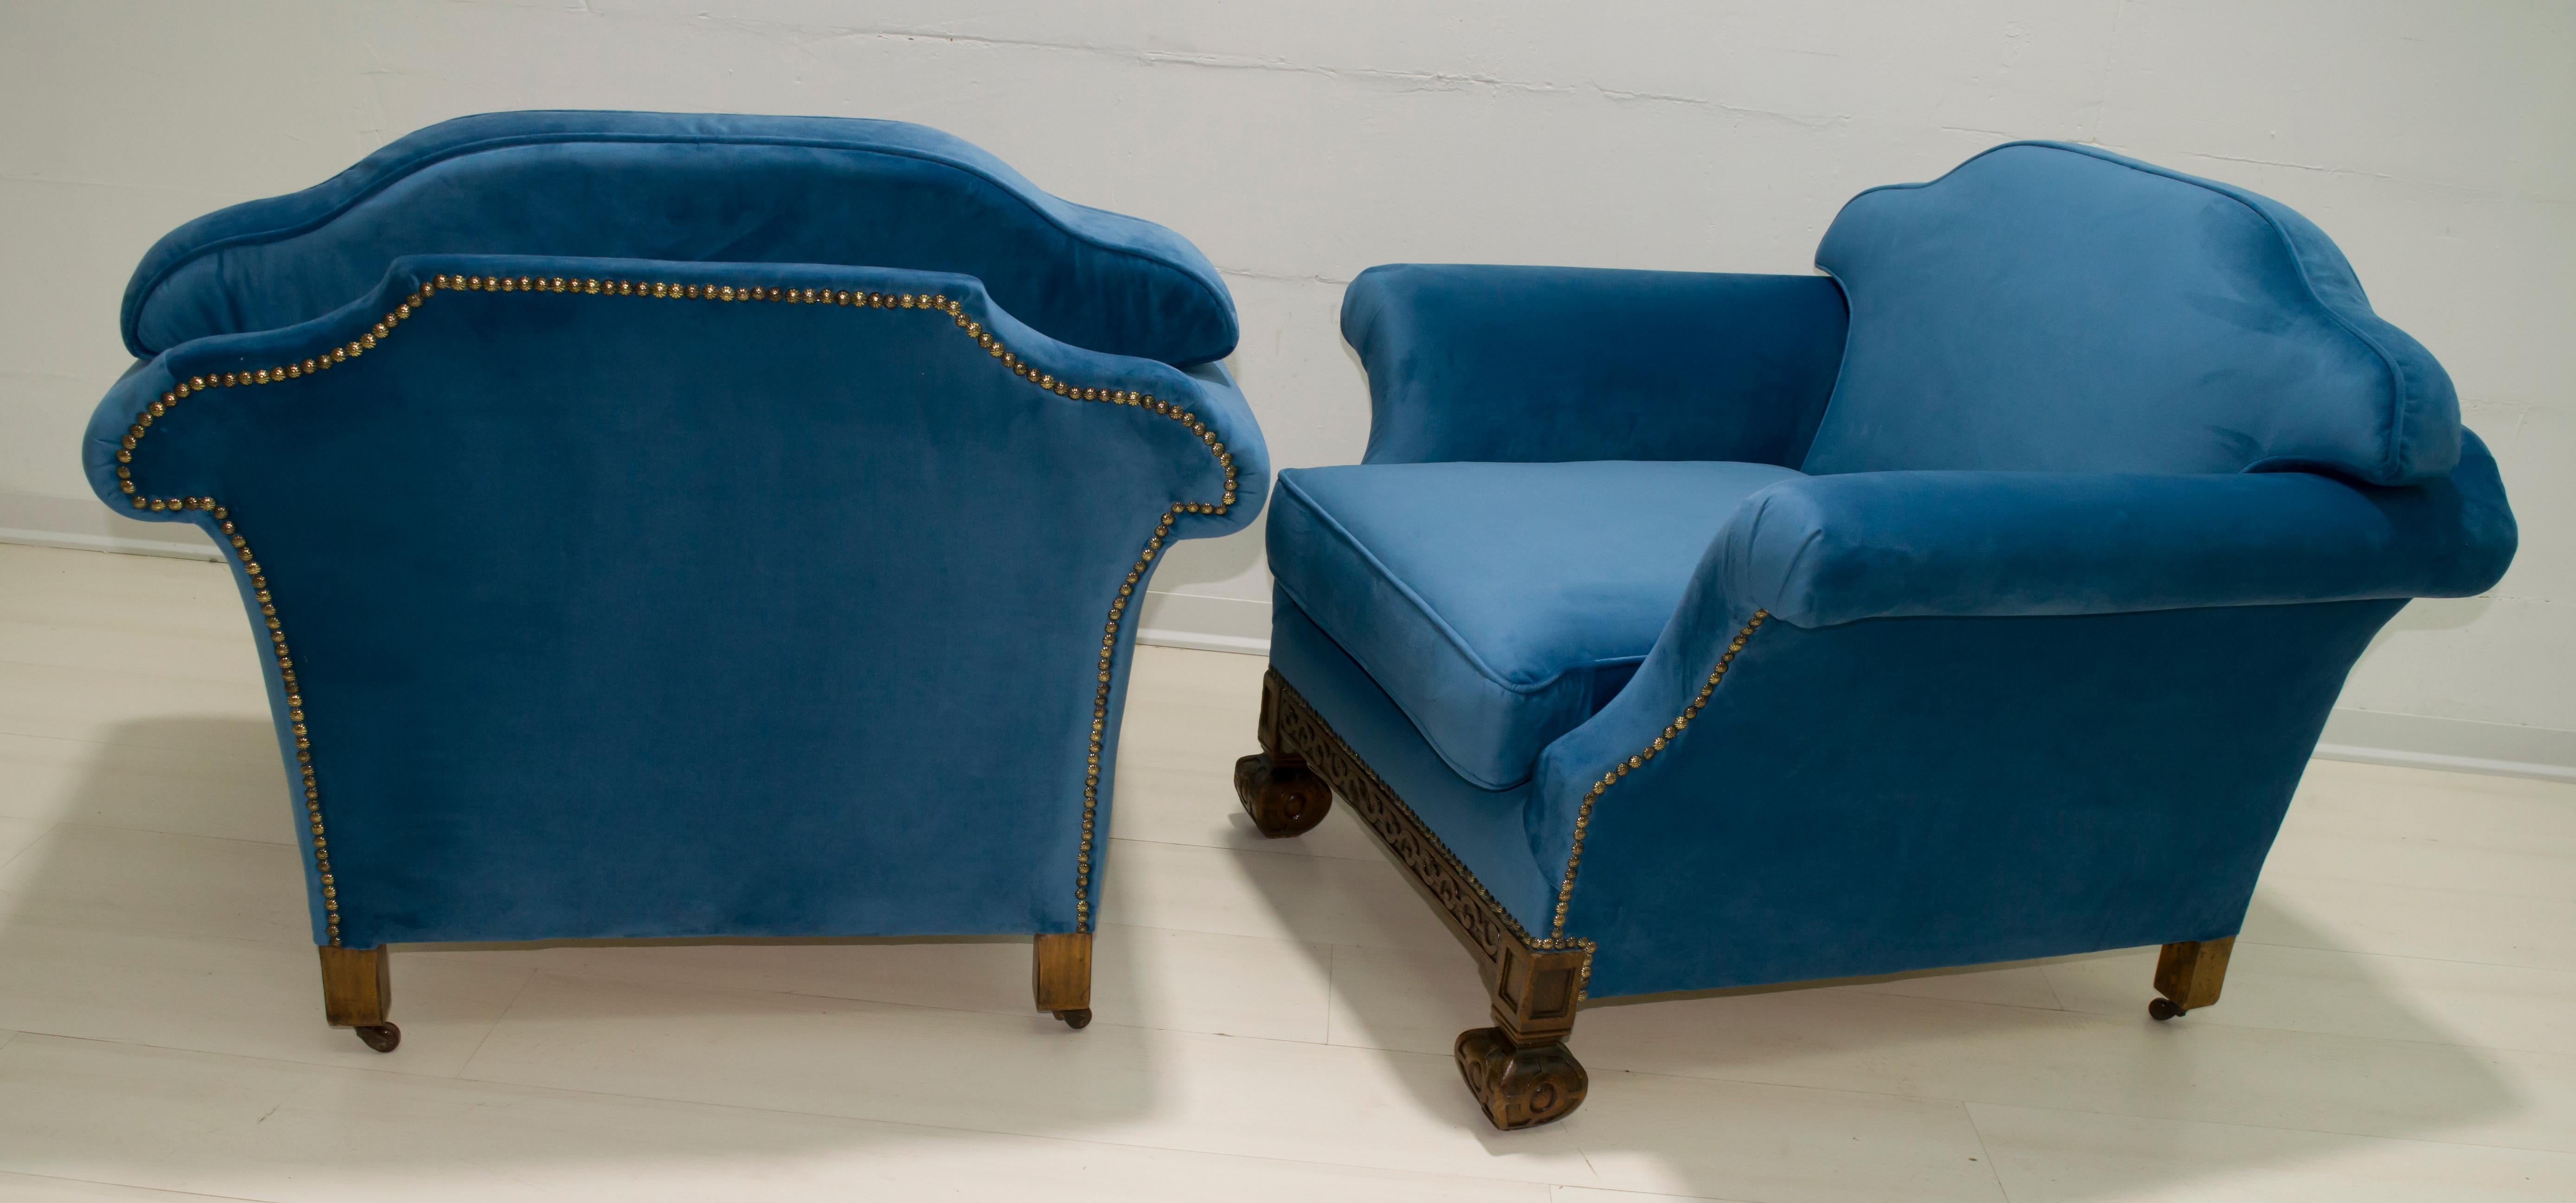 Neo Renaissance pair of armchairs recently upholstered in Italian velvet, the structure is in oak wood, at the end of the 19th century.

